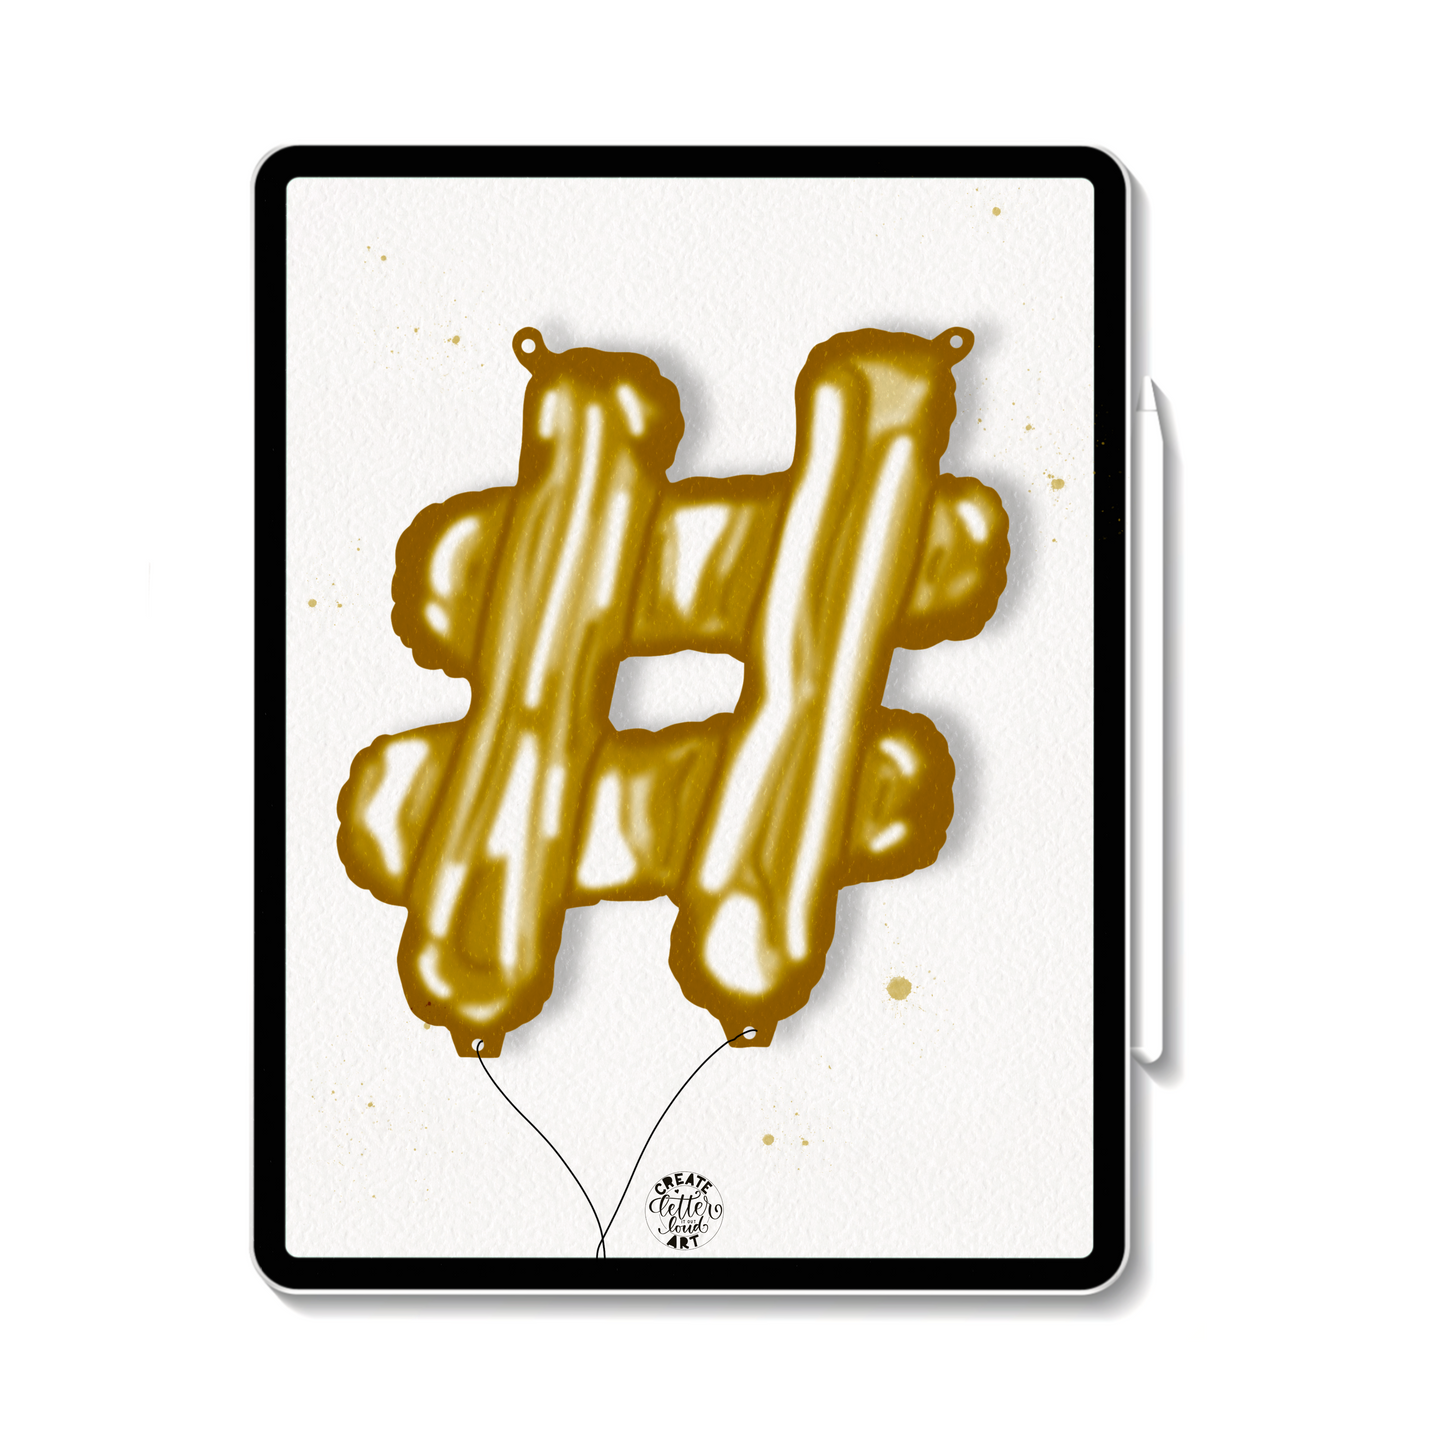 Procreate Ballons „Letters“, Download